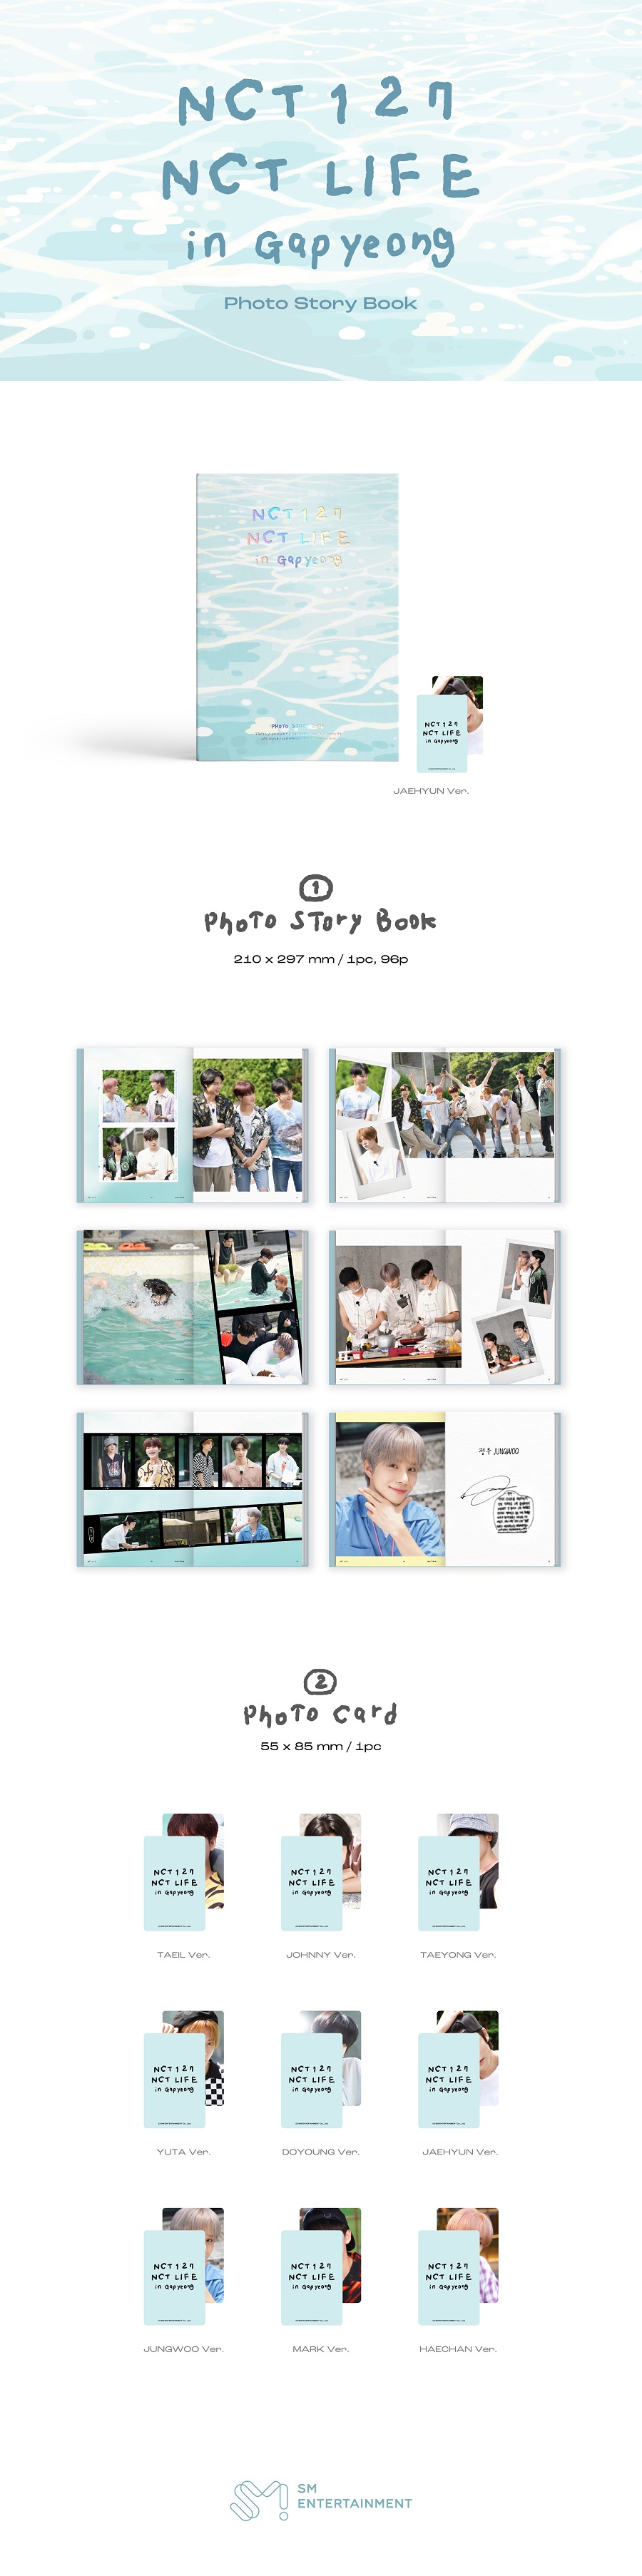 NCT 127(엔시티 127) - NCT LIFE In Gapyeong PHOTO STORY BOOK [ Ver.]